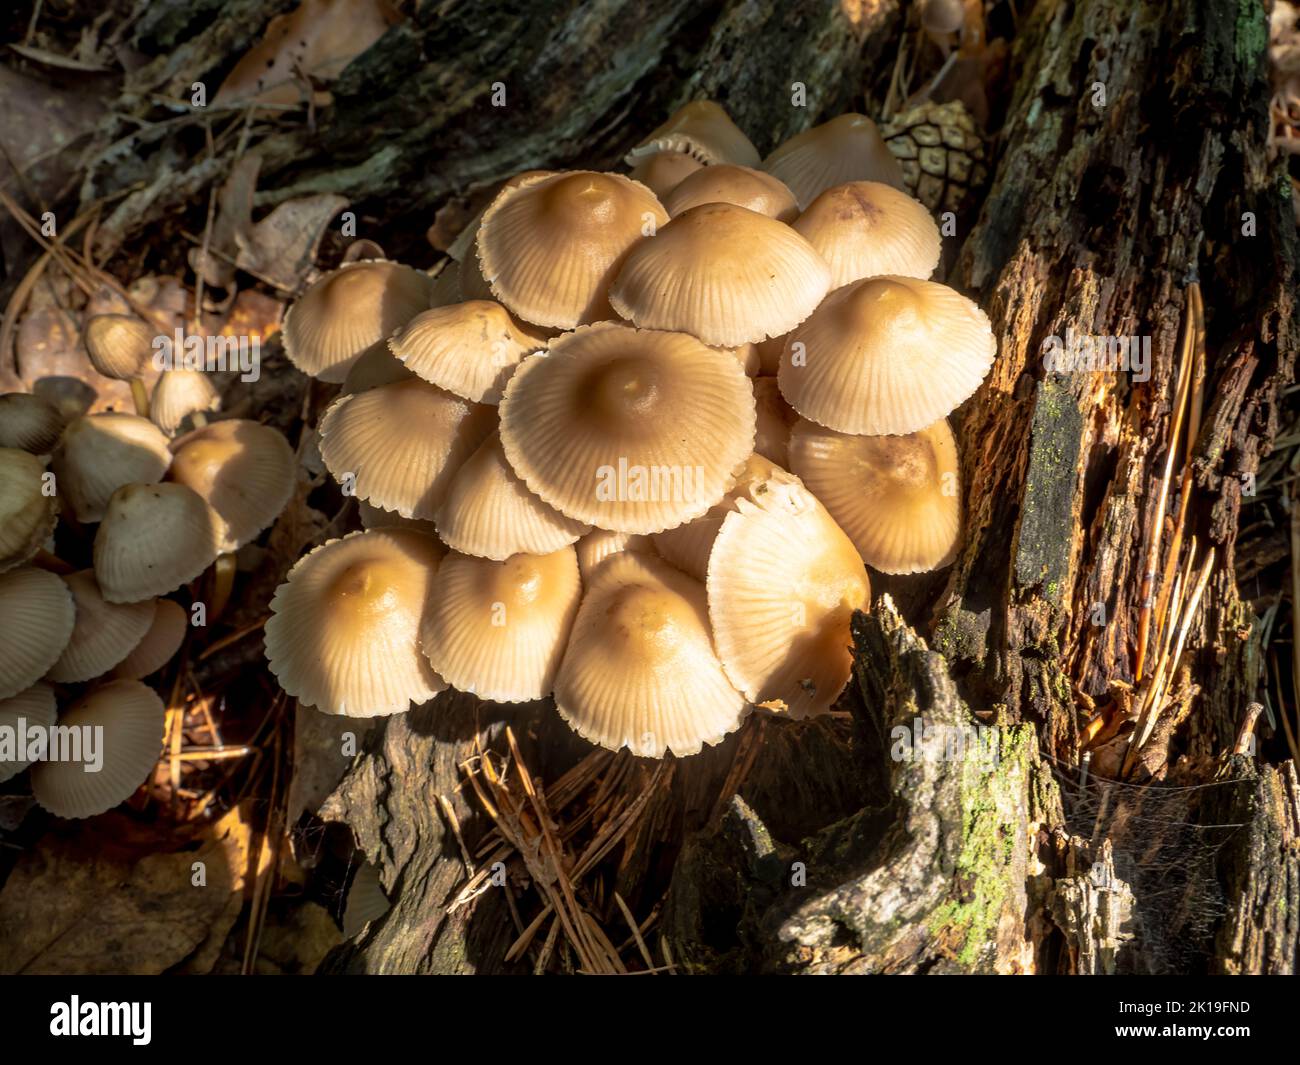 Wild mushroom at big rotten trunk tree that fell down in the deep forest. Parasite mushroom growth on tree. Stock Photo